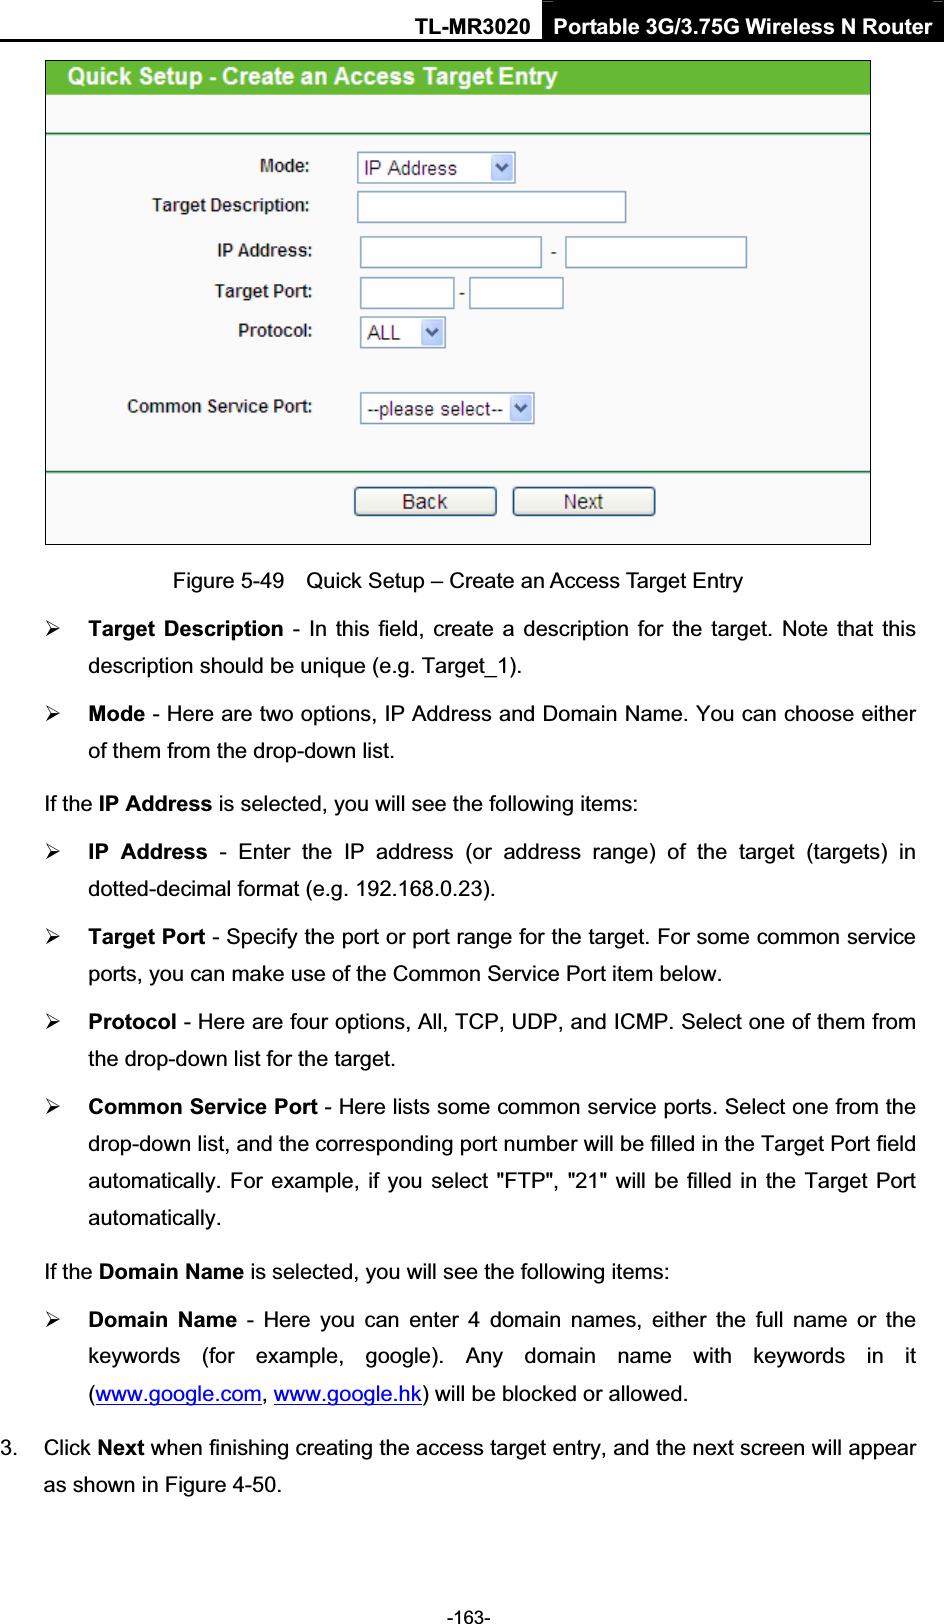 TL-MR3020 Portable 3G/3.75G Wireless N Router-163-Figure 5-49    Quick Setup – Create an Access Target Entry ¾Target  Description  -  In this field,  create a description  for  the  target.  Note that  this description should be unique (e.g. Target_1).   ¾Mode - Here are two options, IP Address and Domain Name. You can choose either of them from the drop-down list.   If the IP Address is selected, you will see the following items: ¾IP  Address  -  Enter  the  IP  address  (or  address  range)  of  the  target  (targets)  in dotted-decimal format (e.g. 192.168.0.23).   ¾Target Port - Specify the port or port range for the target. For some common service ports, you can make use of the Common Service Port item below.   ¾Protocol - Here are four options, All, TCP, UDP, and ICMP. Select one of them from the drop-down list for the target.   ¾Common Service Port - Here lists some common service ports. Select one from the drop-down list, and the corresponding port number will be filled in the Target Port field automatically. For example, if you select &quot;FTP&quot;, &quot;21&quot; will be filled in the Target Port automatically.If the Domain Name is selected, you will see the following items: ¾Domain  Name  -  Here  you  can  enter  4  domain  names,  either  the  full  name  or  the keywords  (for  example,  google).  Any  domain  name  with  keywords  in  it (www.google.com,www.google.hk) will be blocked or allowed.   3.  Click Next when finishing creating the access target entry, and the next screen will appear as shown in Figure 4-50. 